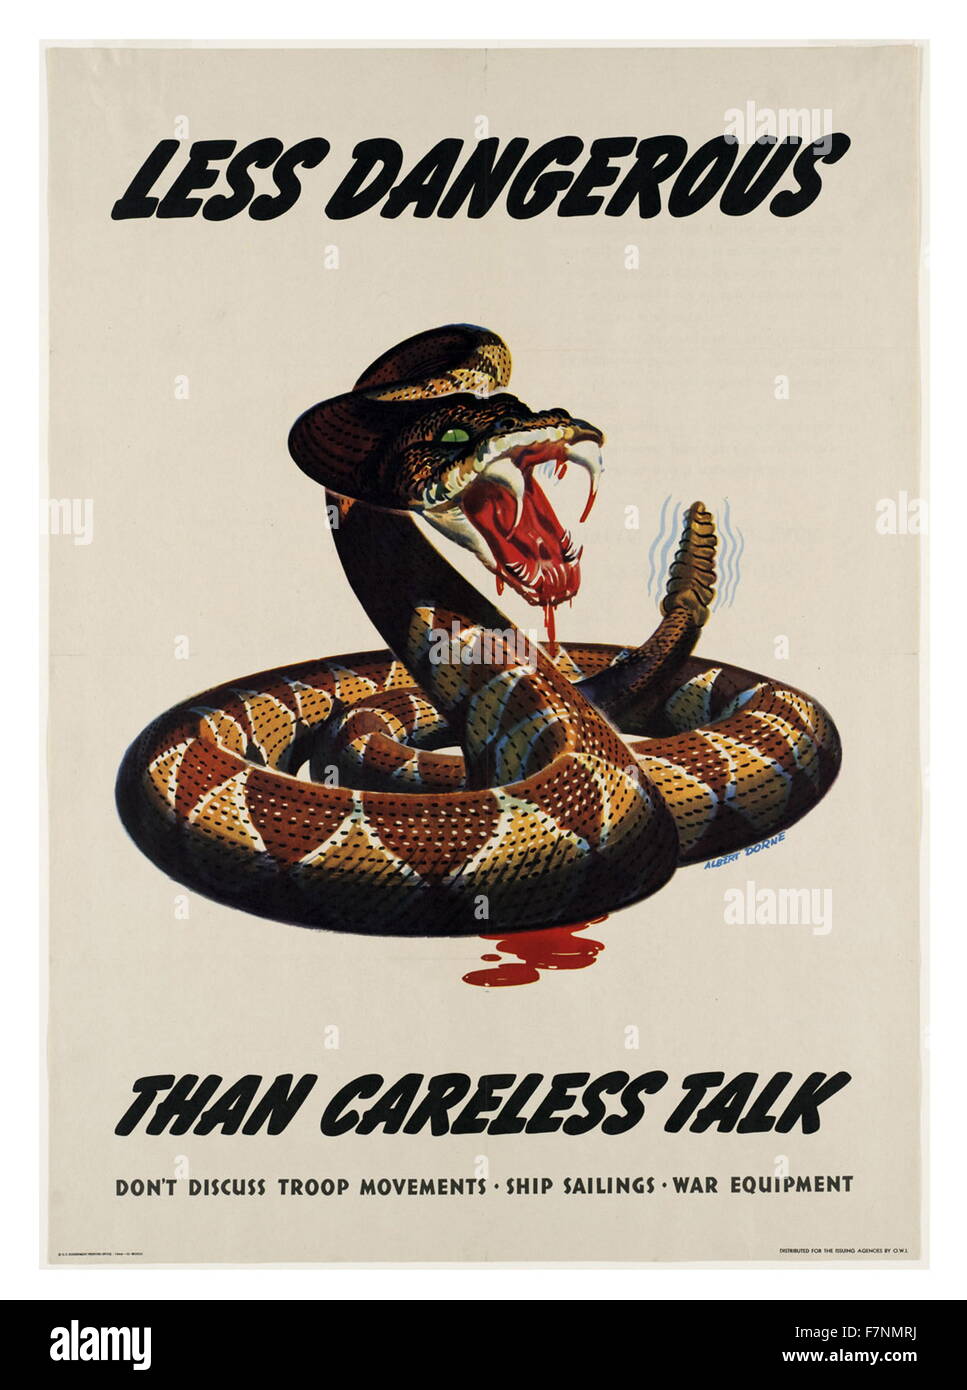 American WWII propaganda poster warning of the security dangers of talking about military movements and strategies. Stock Photo